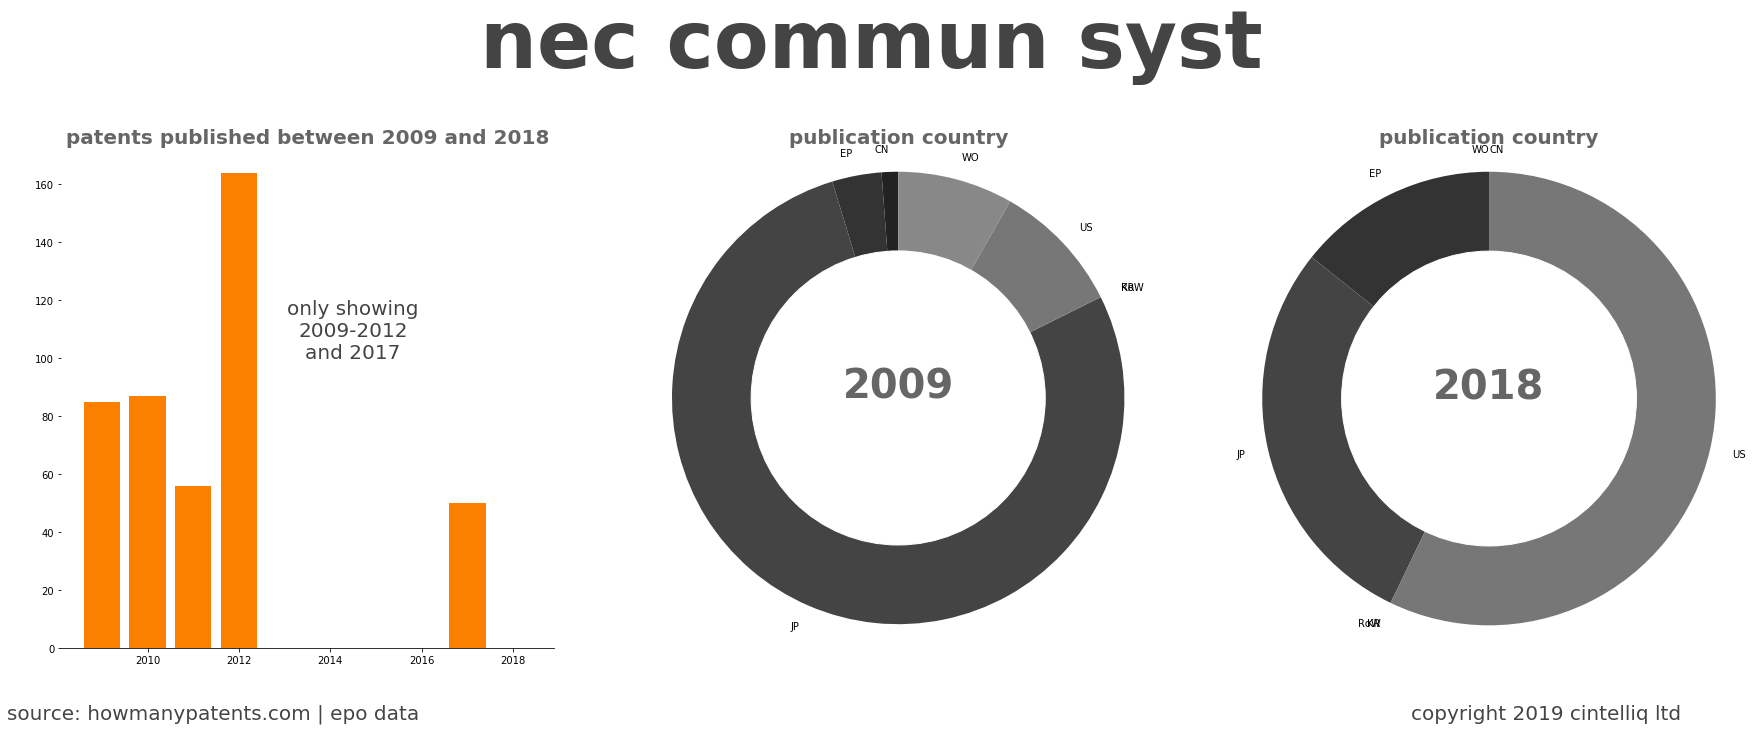 summary of patents for Nec Commun Syst